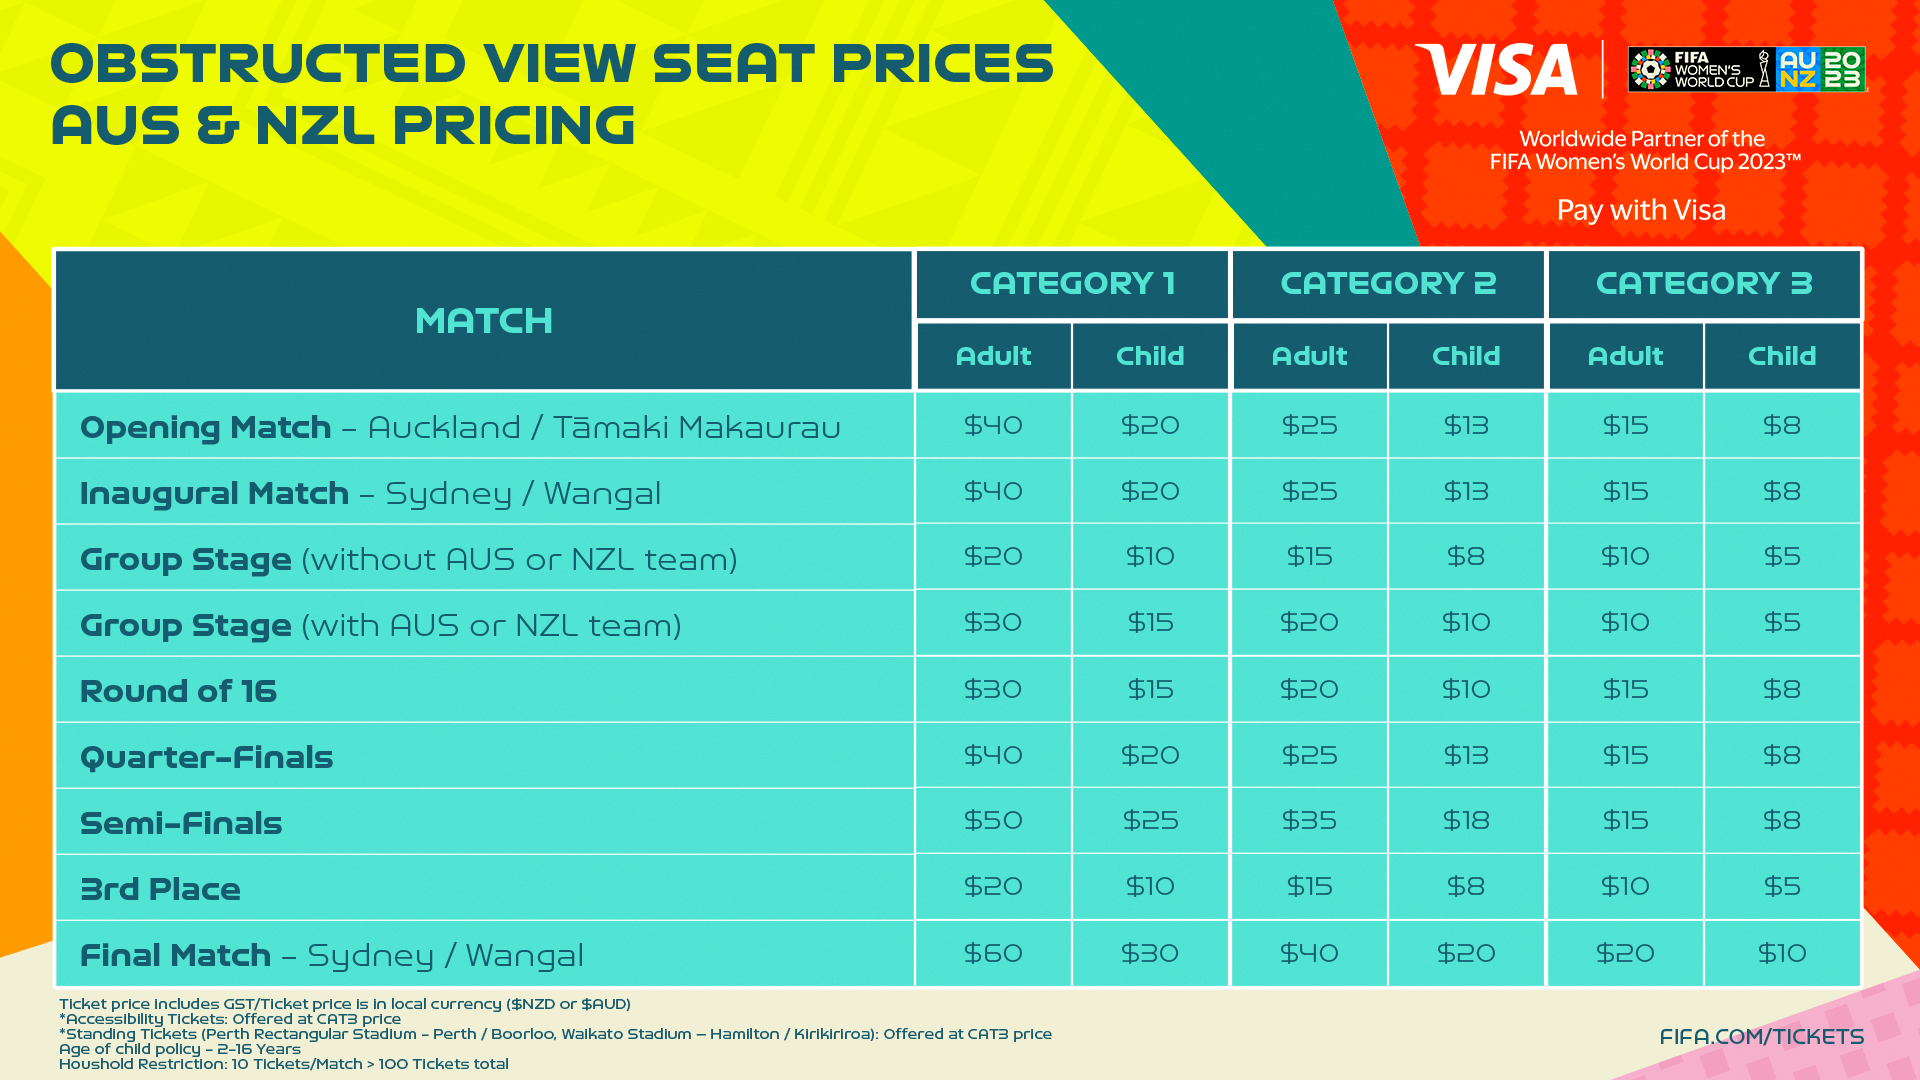 FIFA_FWWC23_Ticketing_Media-Kit-16x9_Ticket-Prices-Grid.png